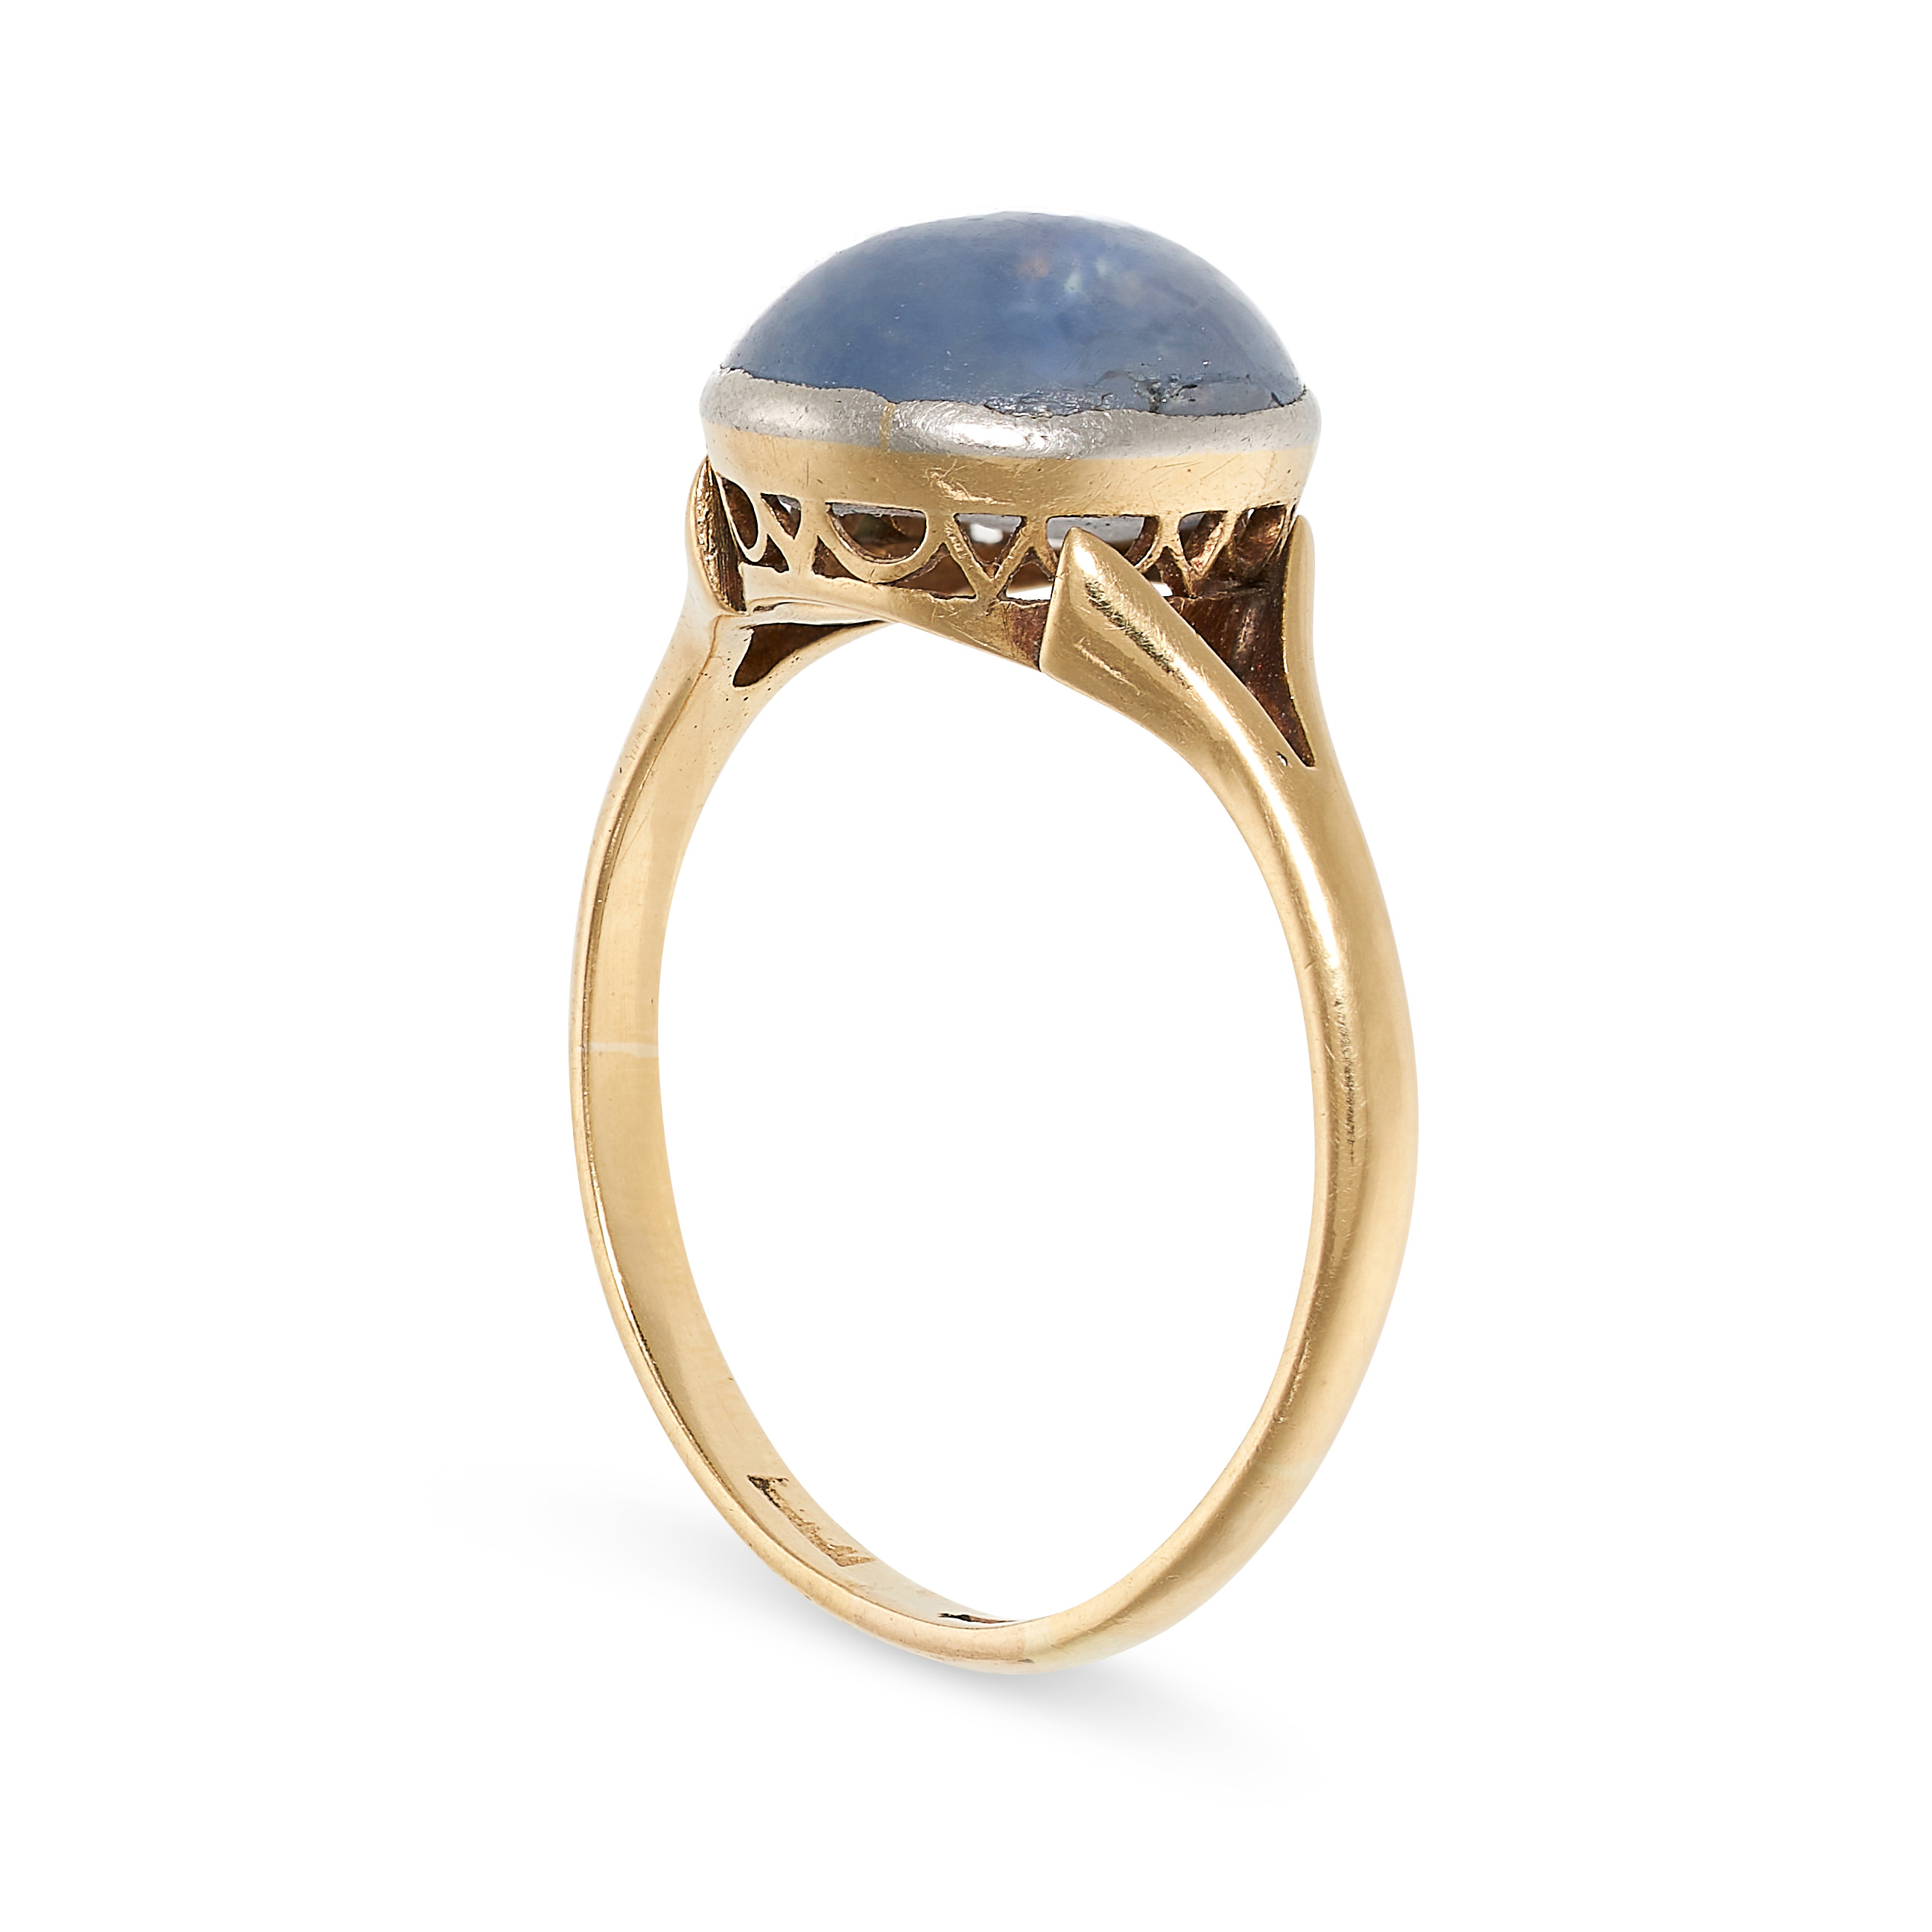 AN ANTIQUE STAR SAPPHIRE RING in yellow gold, set with a cabochon star sapphire, marked - Image 3 of 3